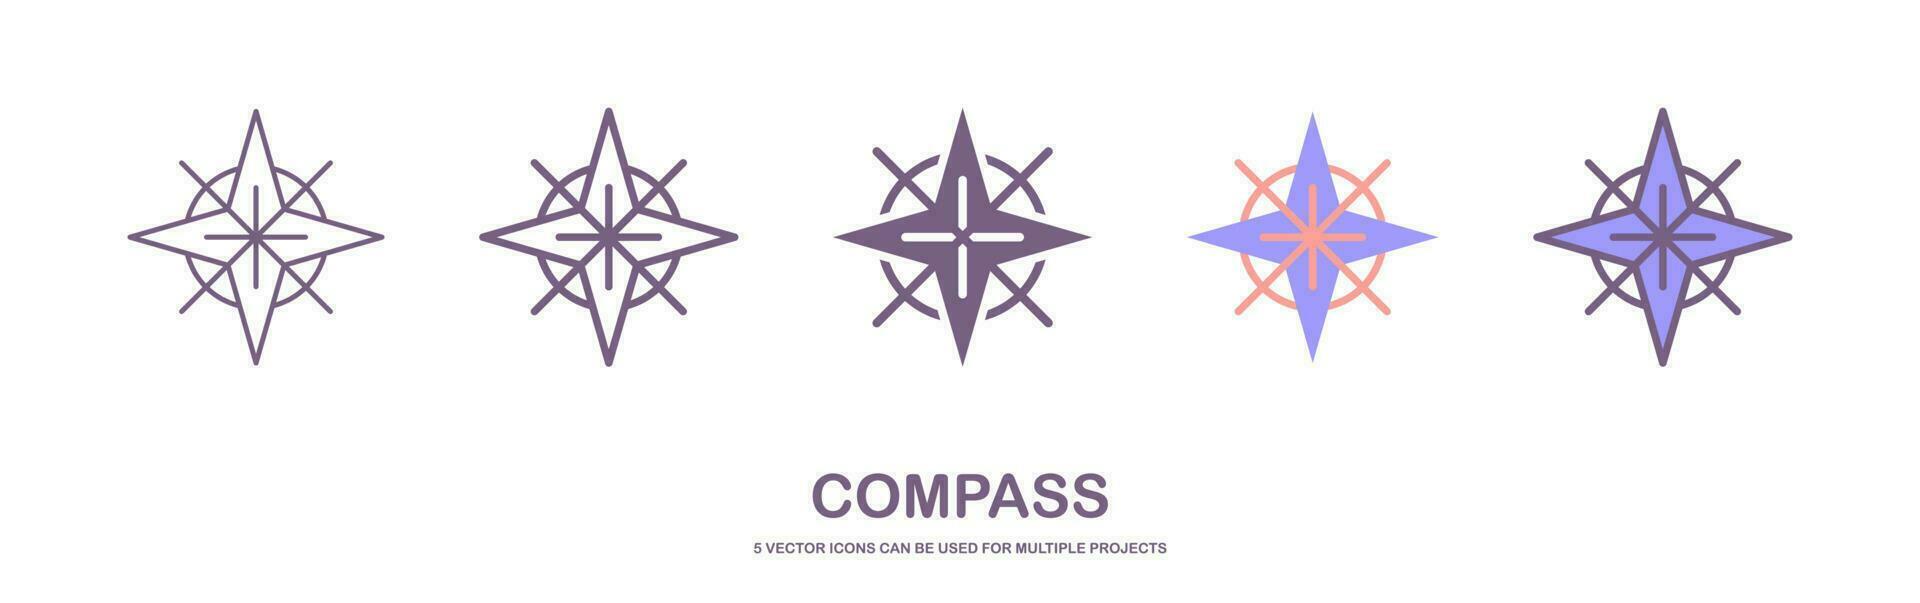 Vector compass rose with North, South, East and West indicated. compass icon or logo isolated sign symbol vector illustration - Collection of high quality style vector icons